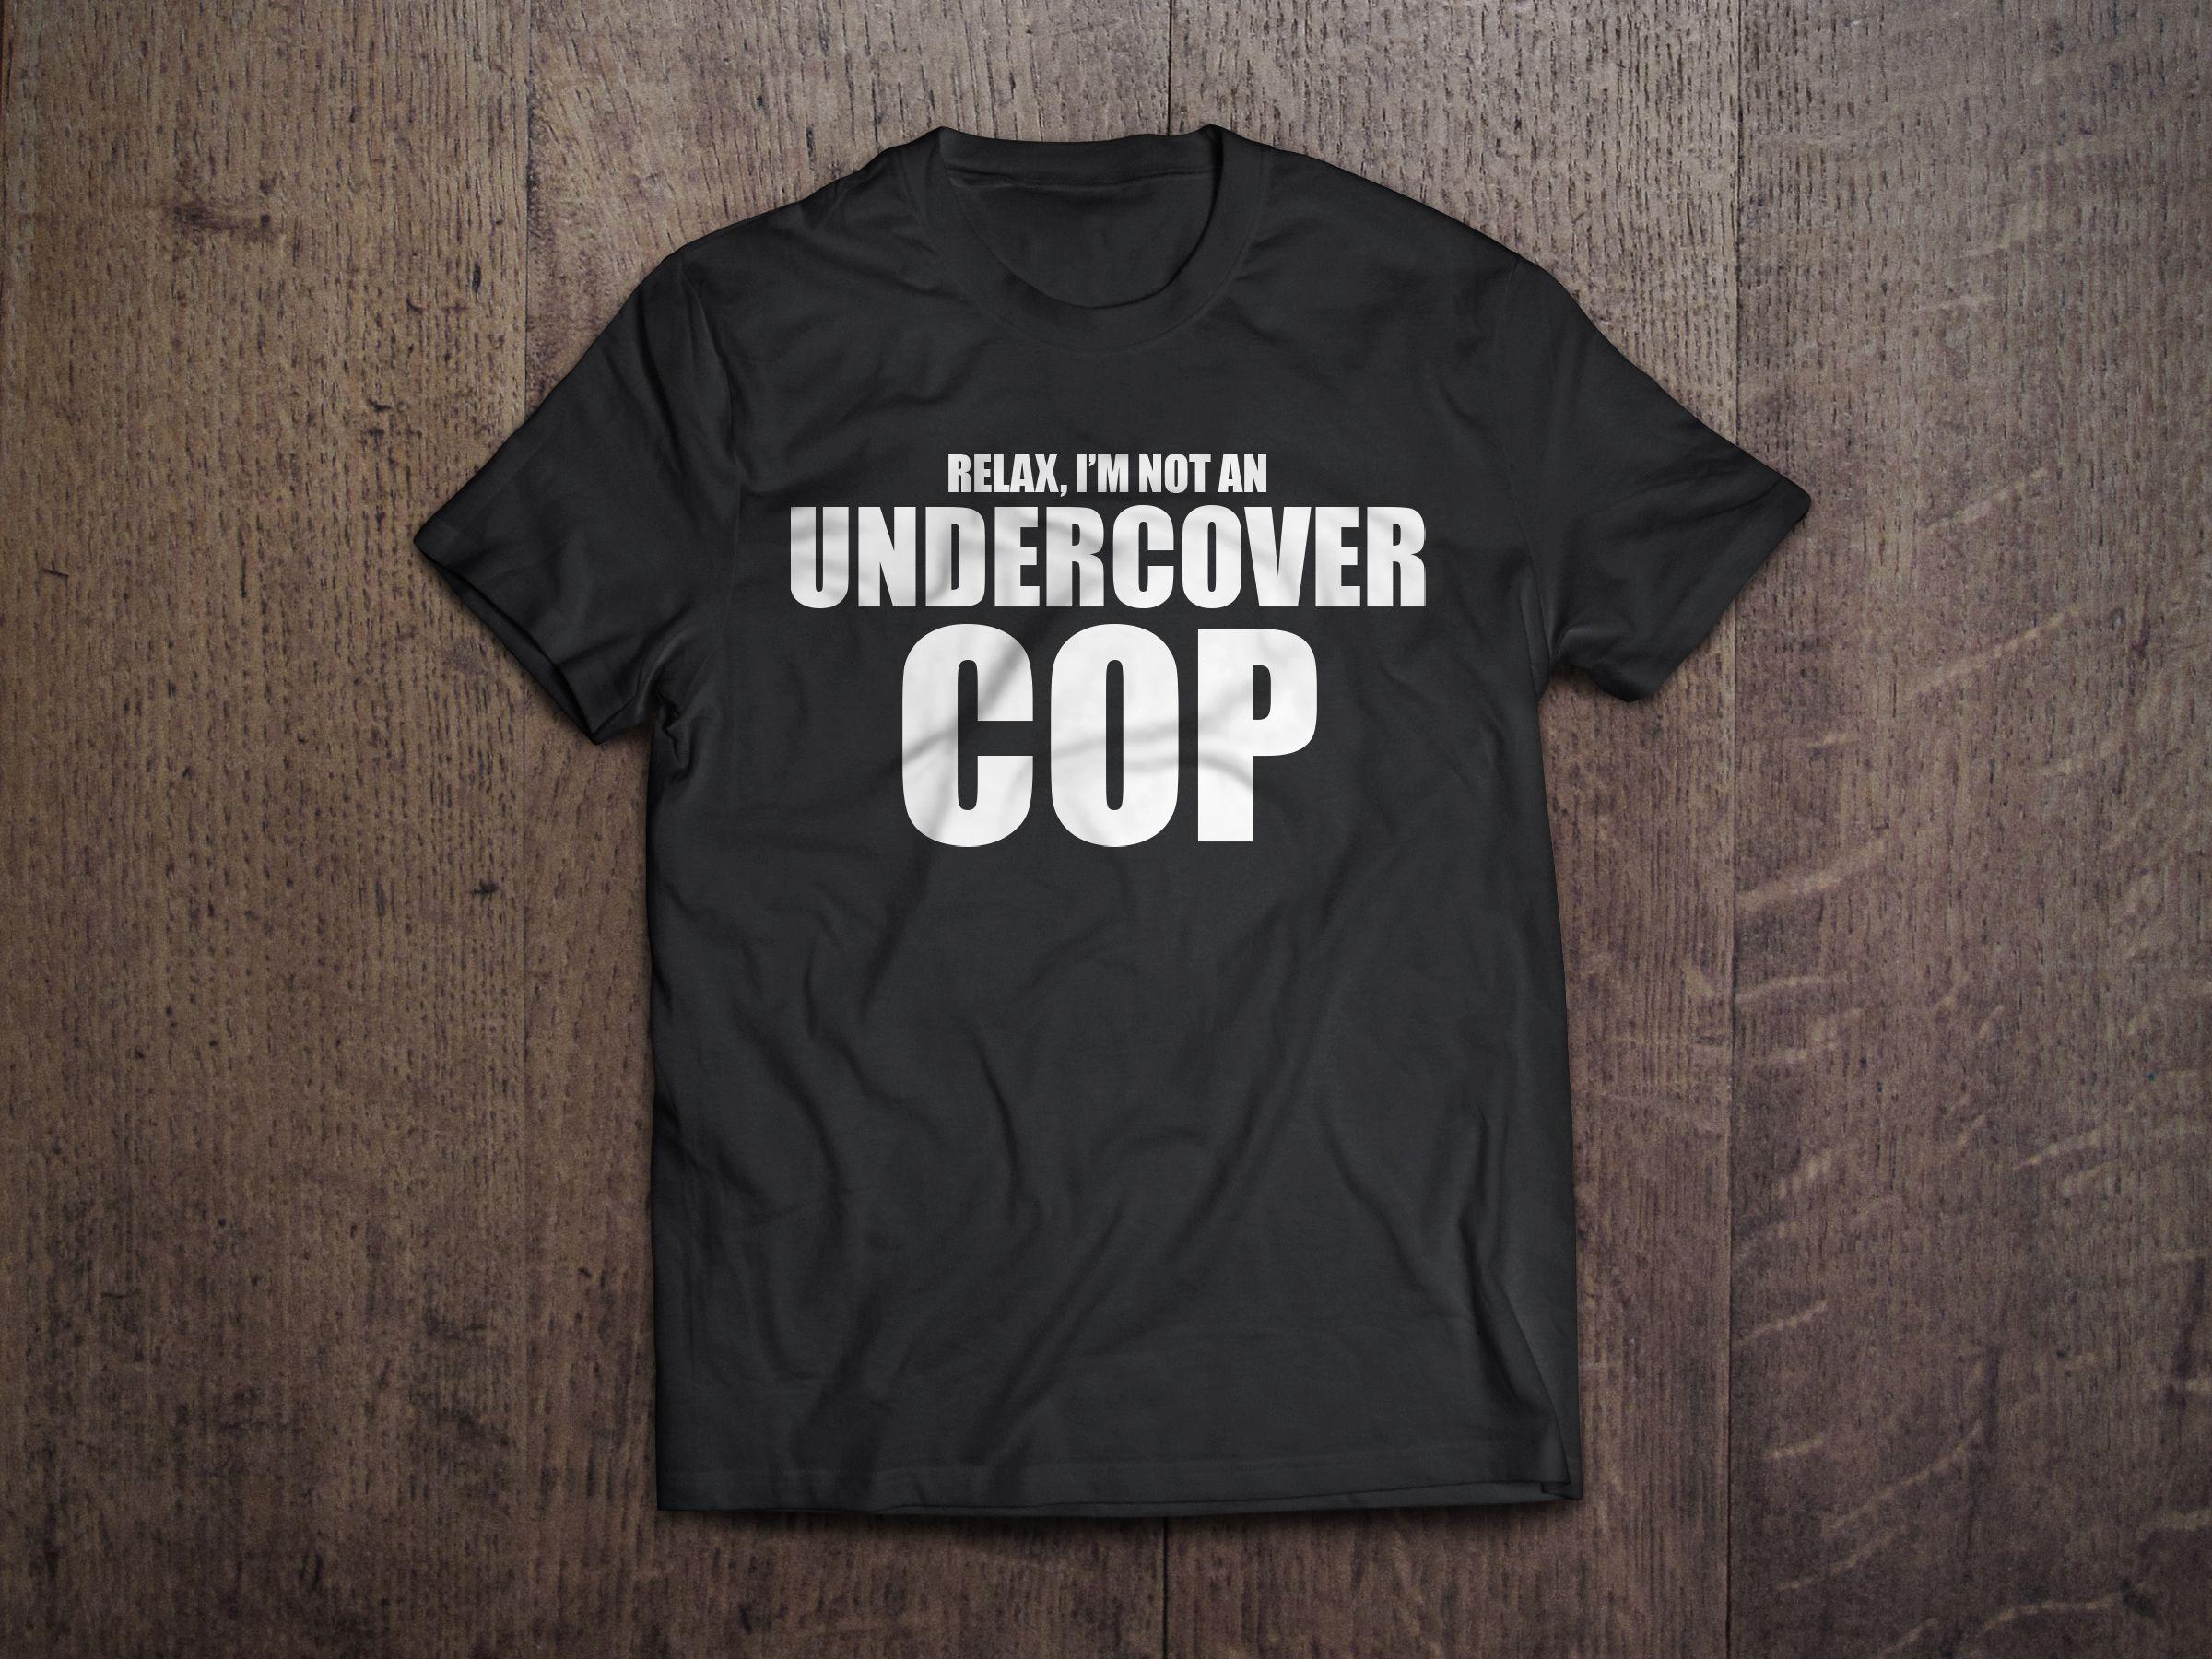 Undercover Police Logo - Relax, I'm Not An Undercover Cop. Drinking T Shirts. Shirts